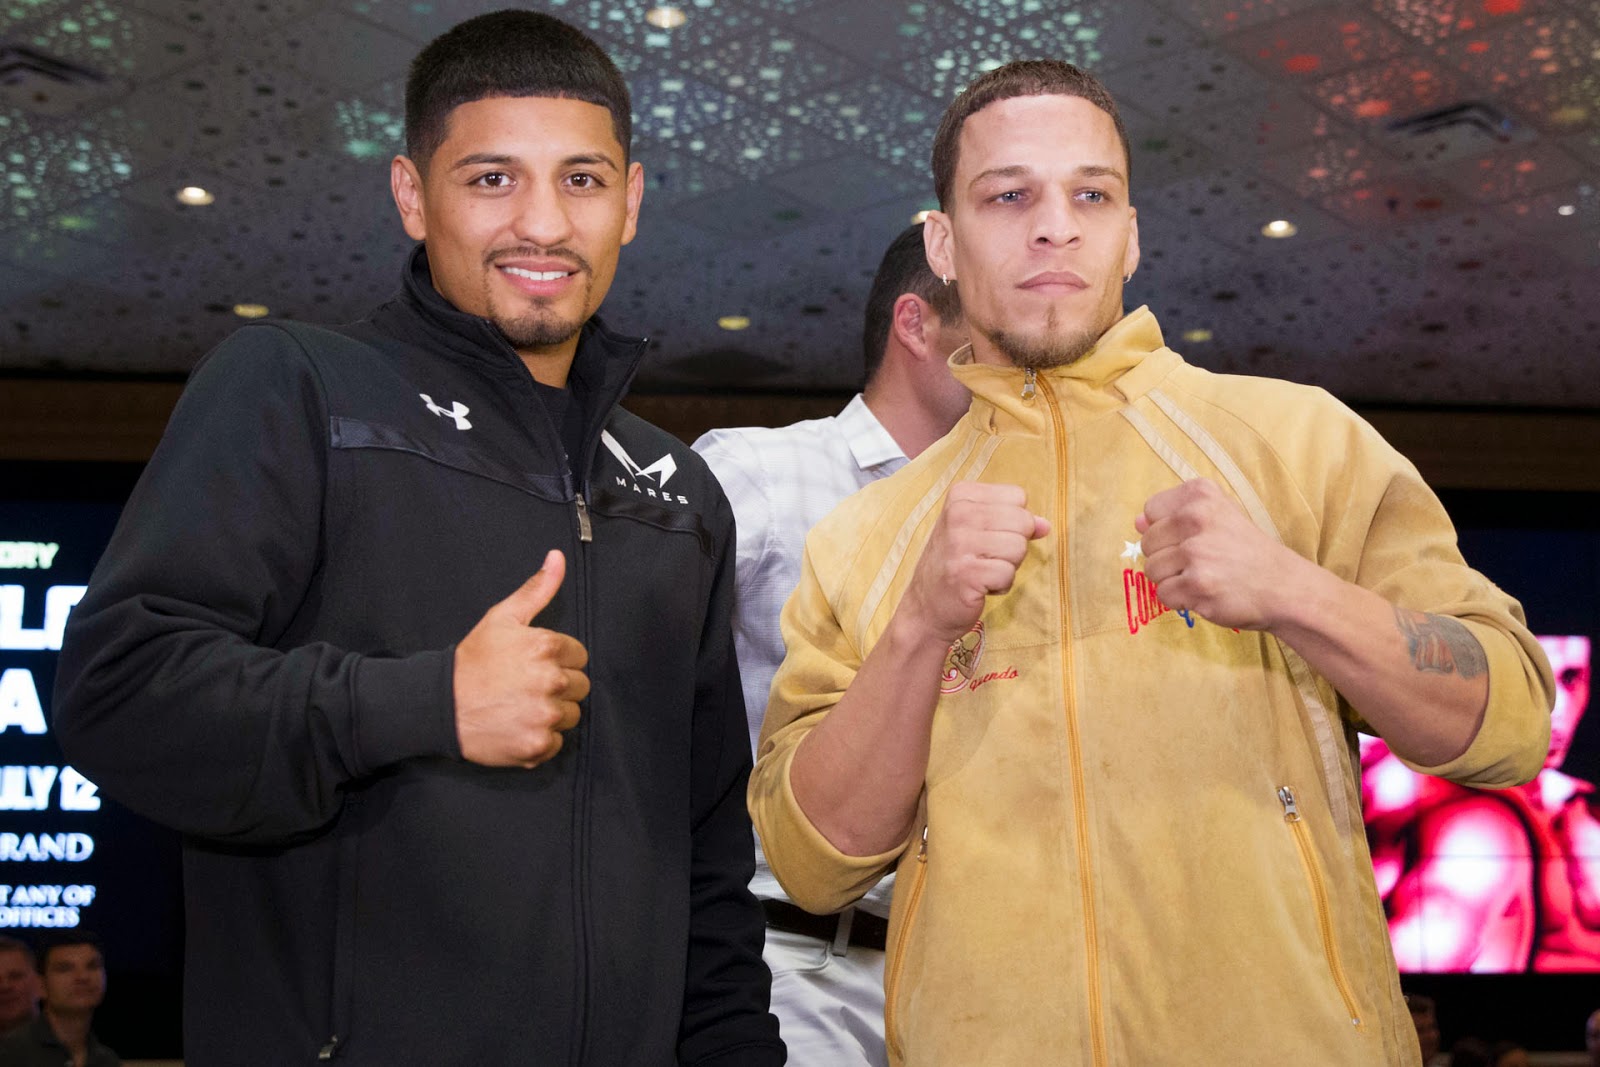 Abner Mares: "Saturday it is going to be my night"